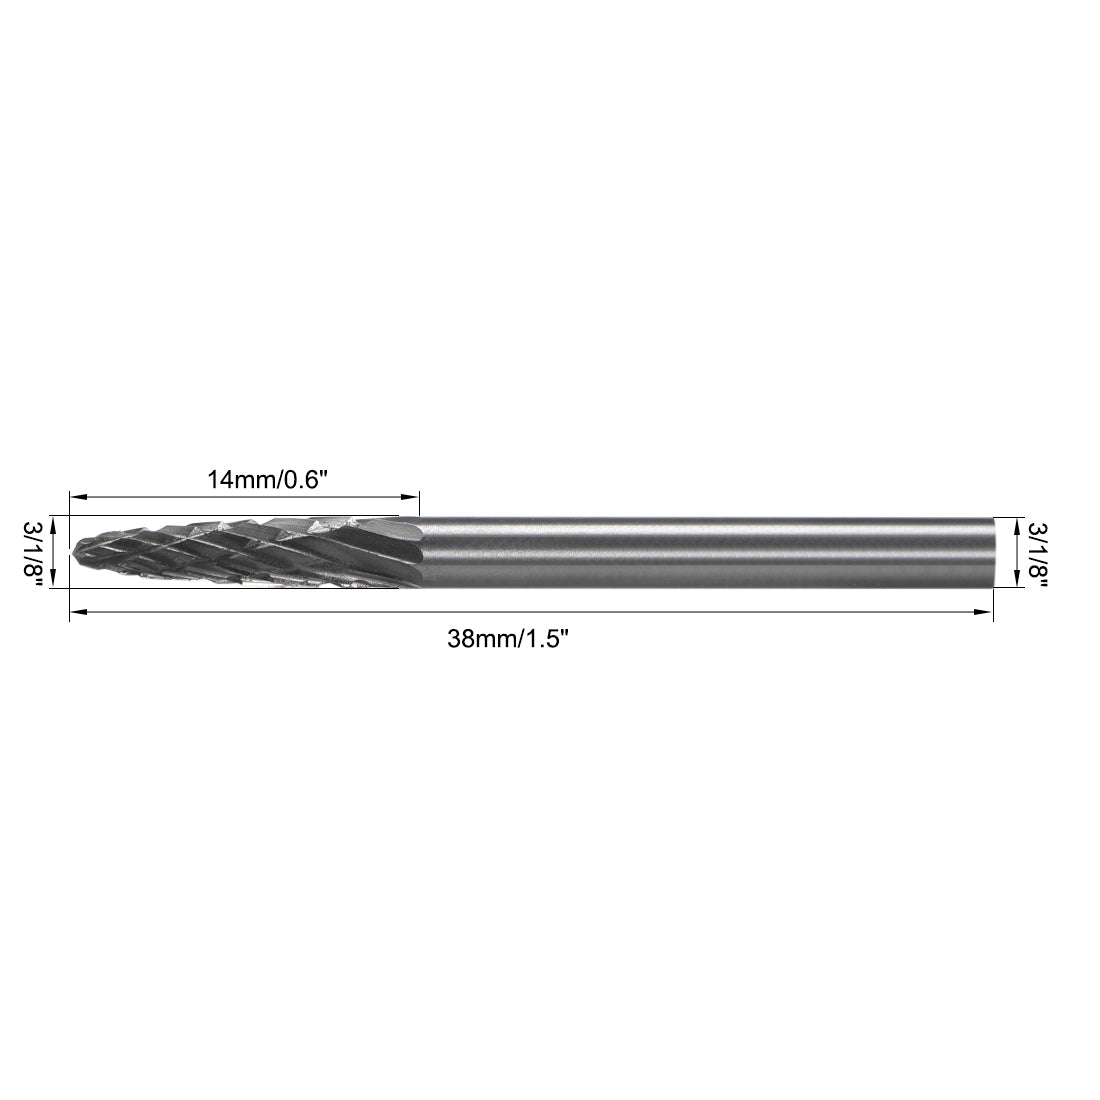 uxcell Uxcell Double Cut Rotary Burrs File Cone Shape 1/8" Shank Dia 1/8" Head Size